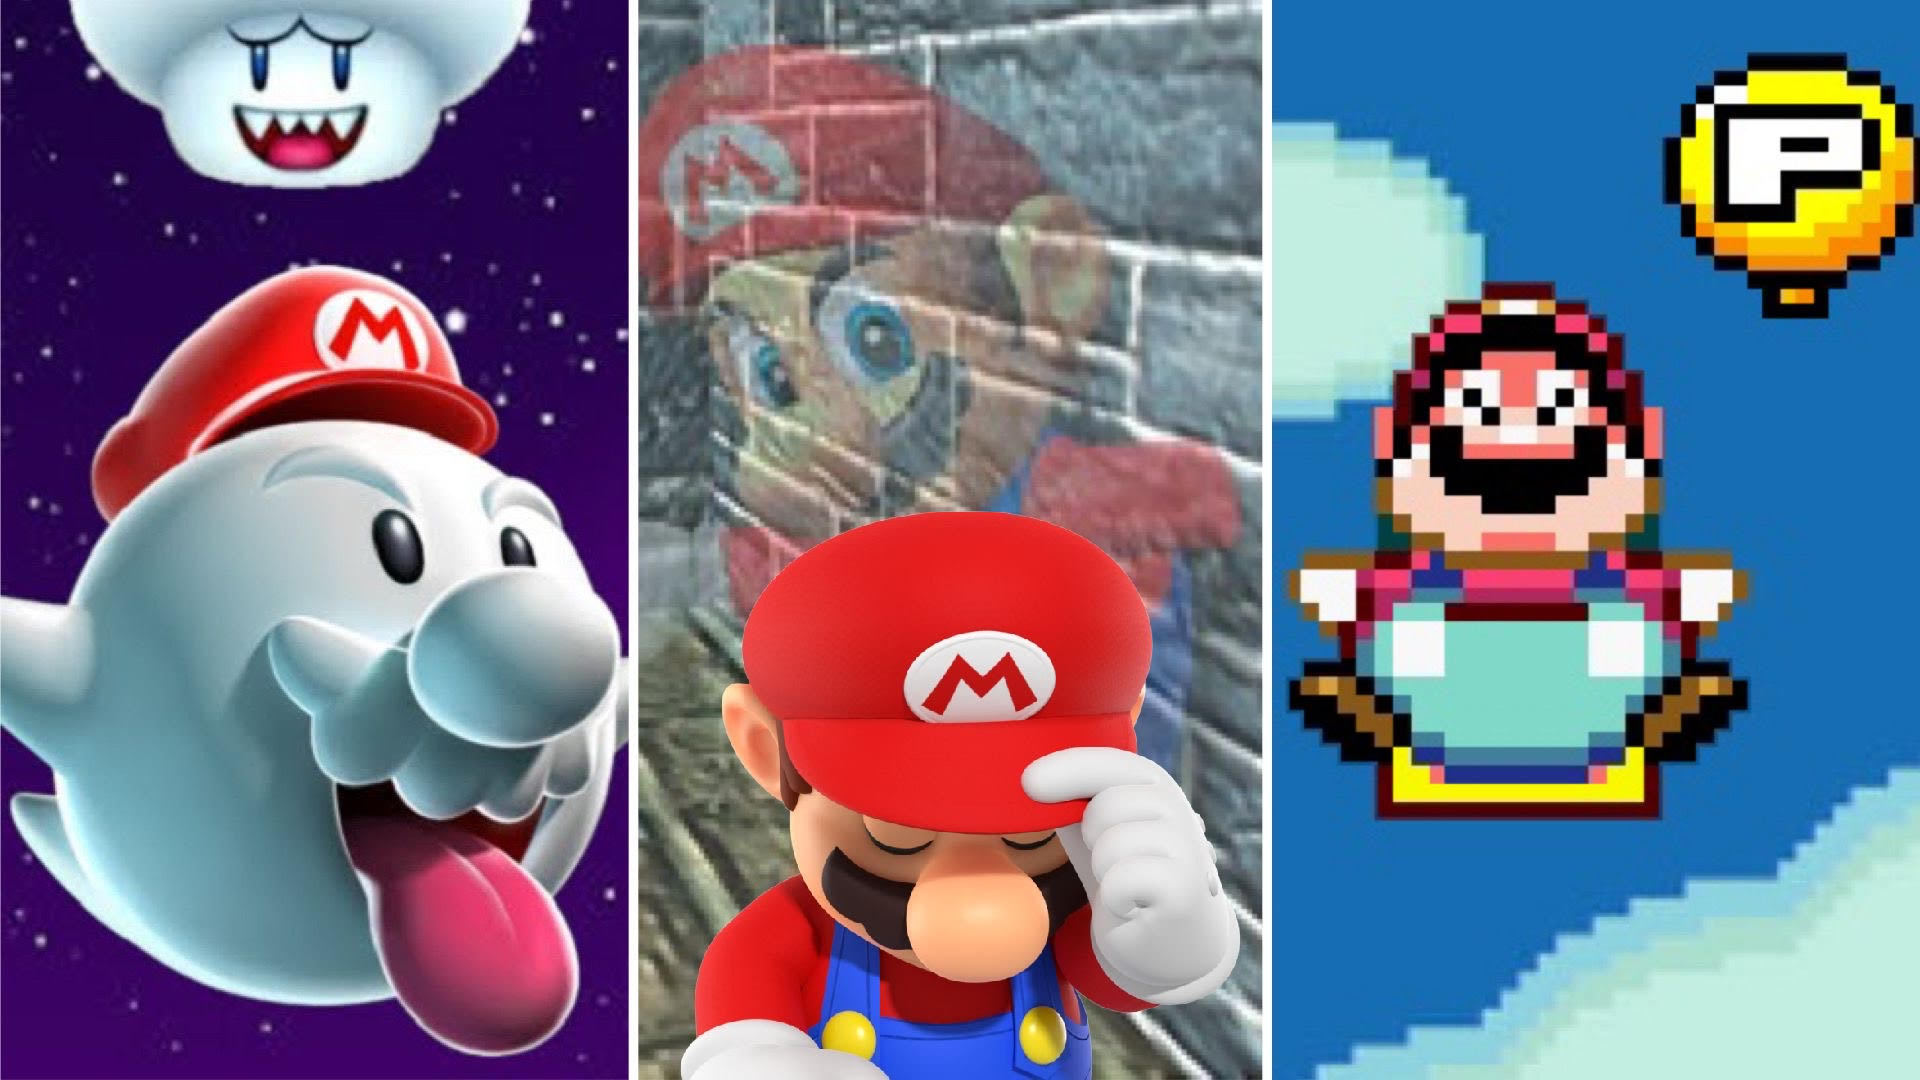 Super Mario Odyssey': Ranking The Super Mario Games From Best To Worst